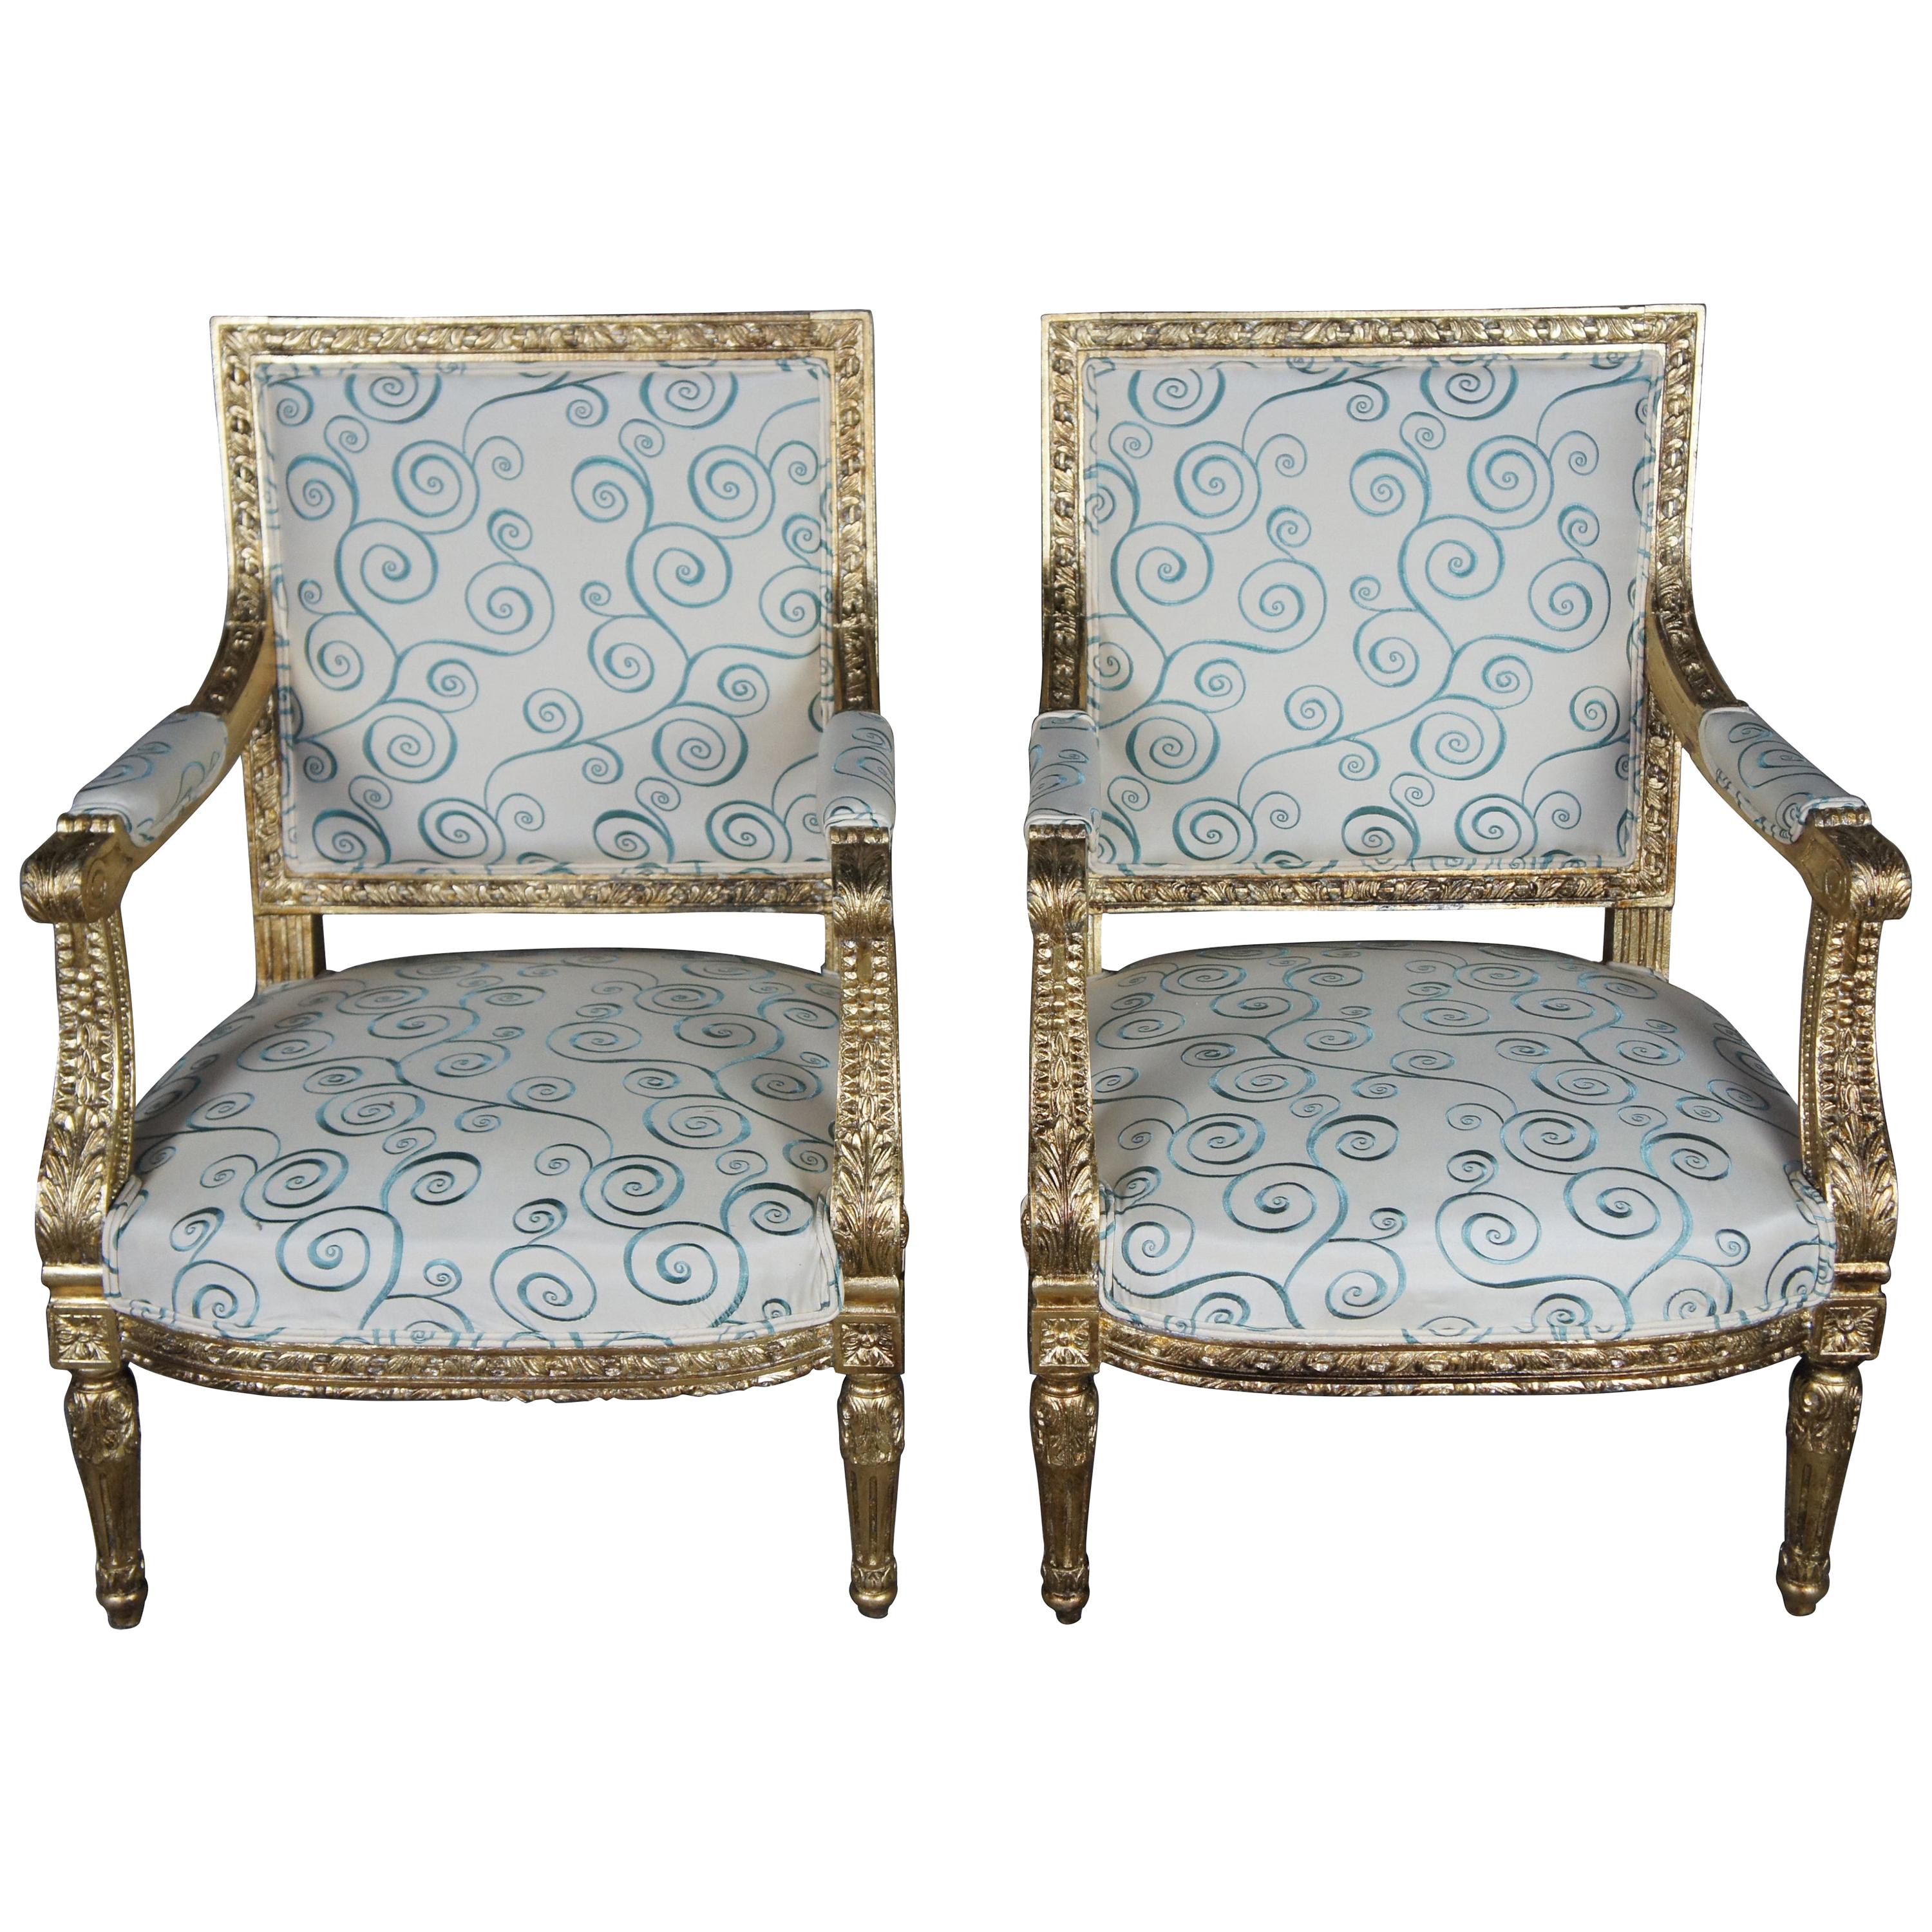 Antique 19th Century Louis XVI Fauteuil Armchairs Neoclassical French Accent